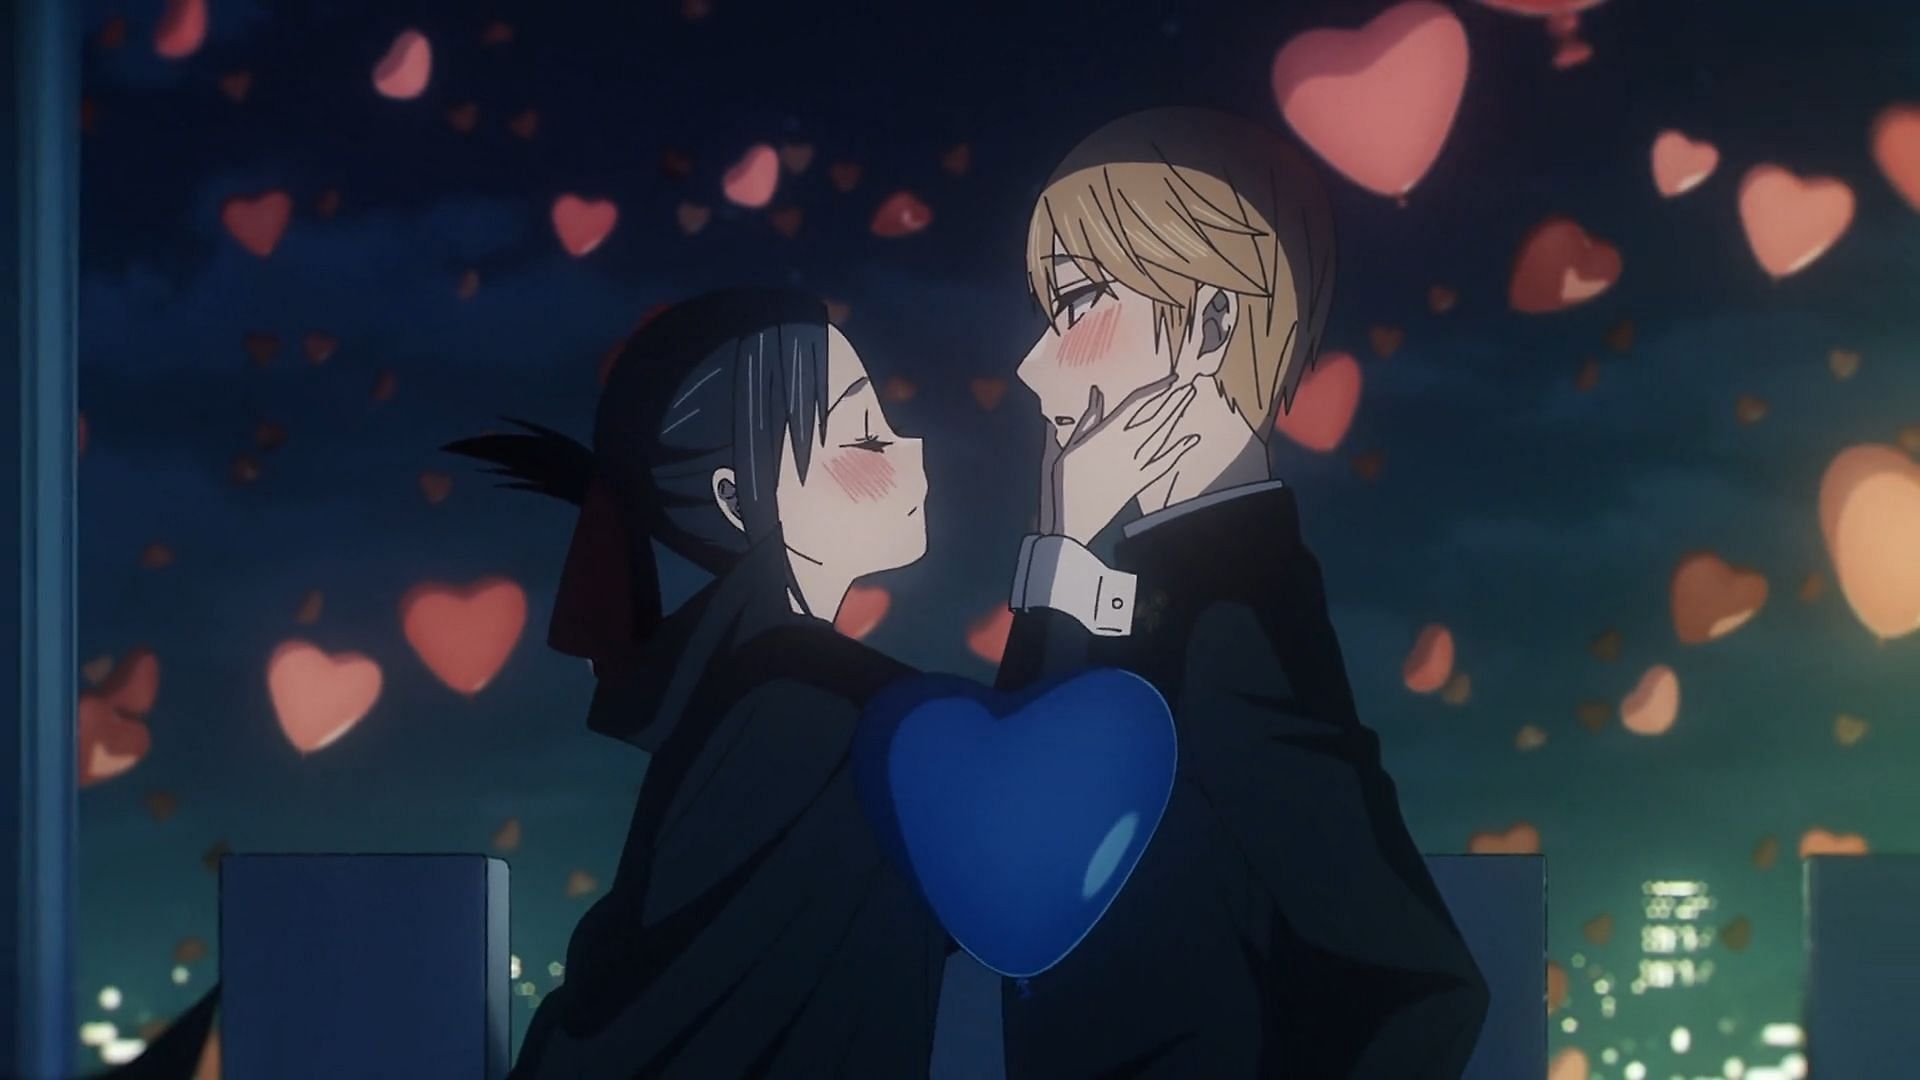 Kaguya-sama: Love is War - The First Kiss that Never Ends Japanese broadcast announced (Image via A-1 Pictures)